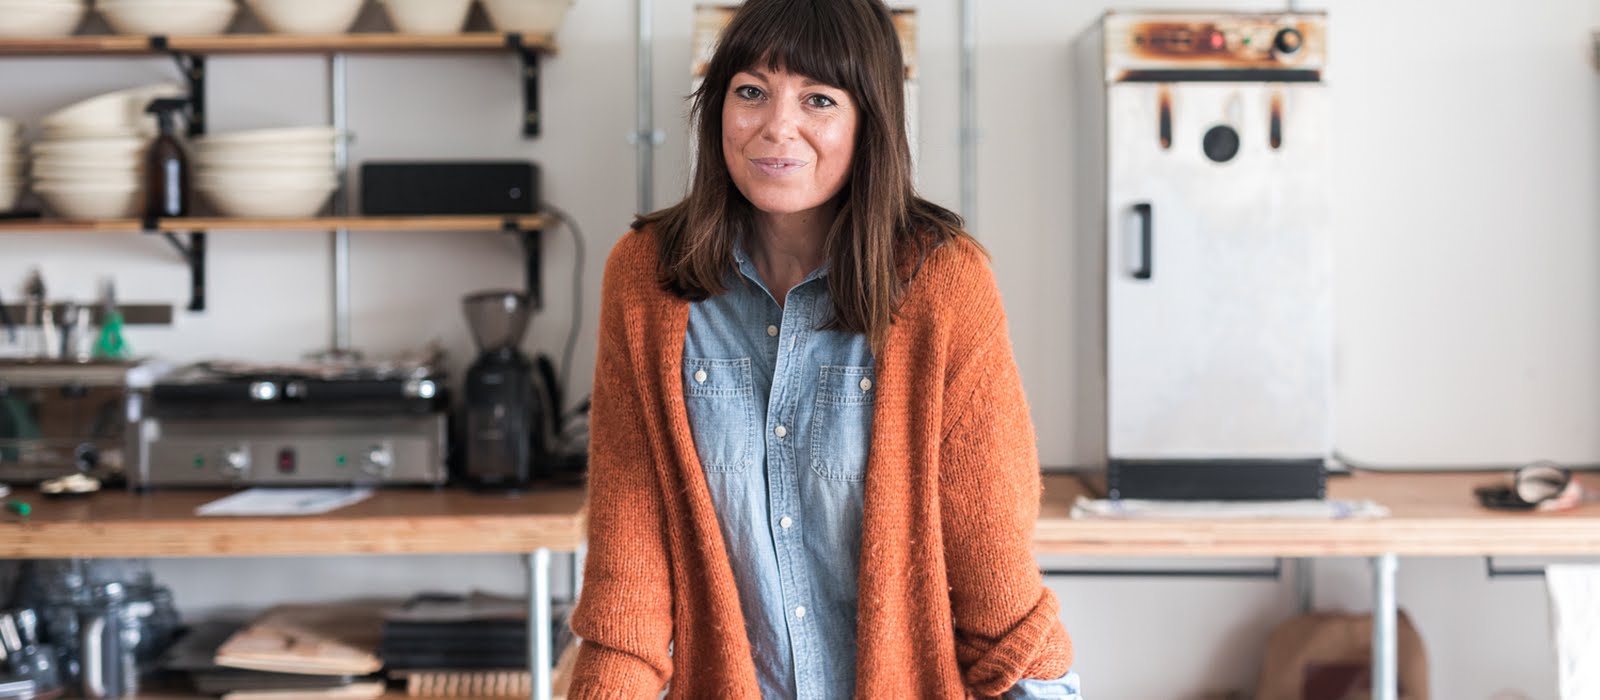 Meet the Cork founder of The Happy Tummy Co, the bakery celebrities are obsessed with